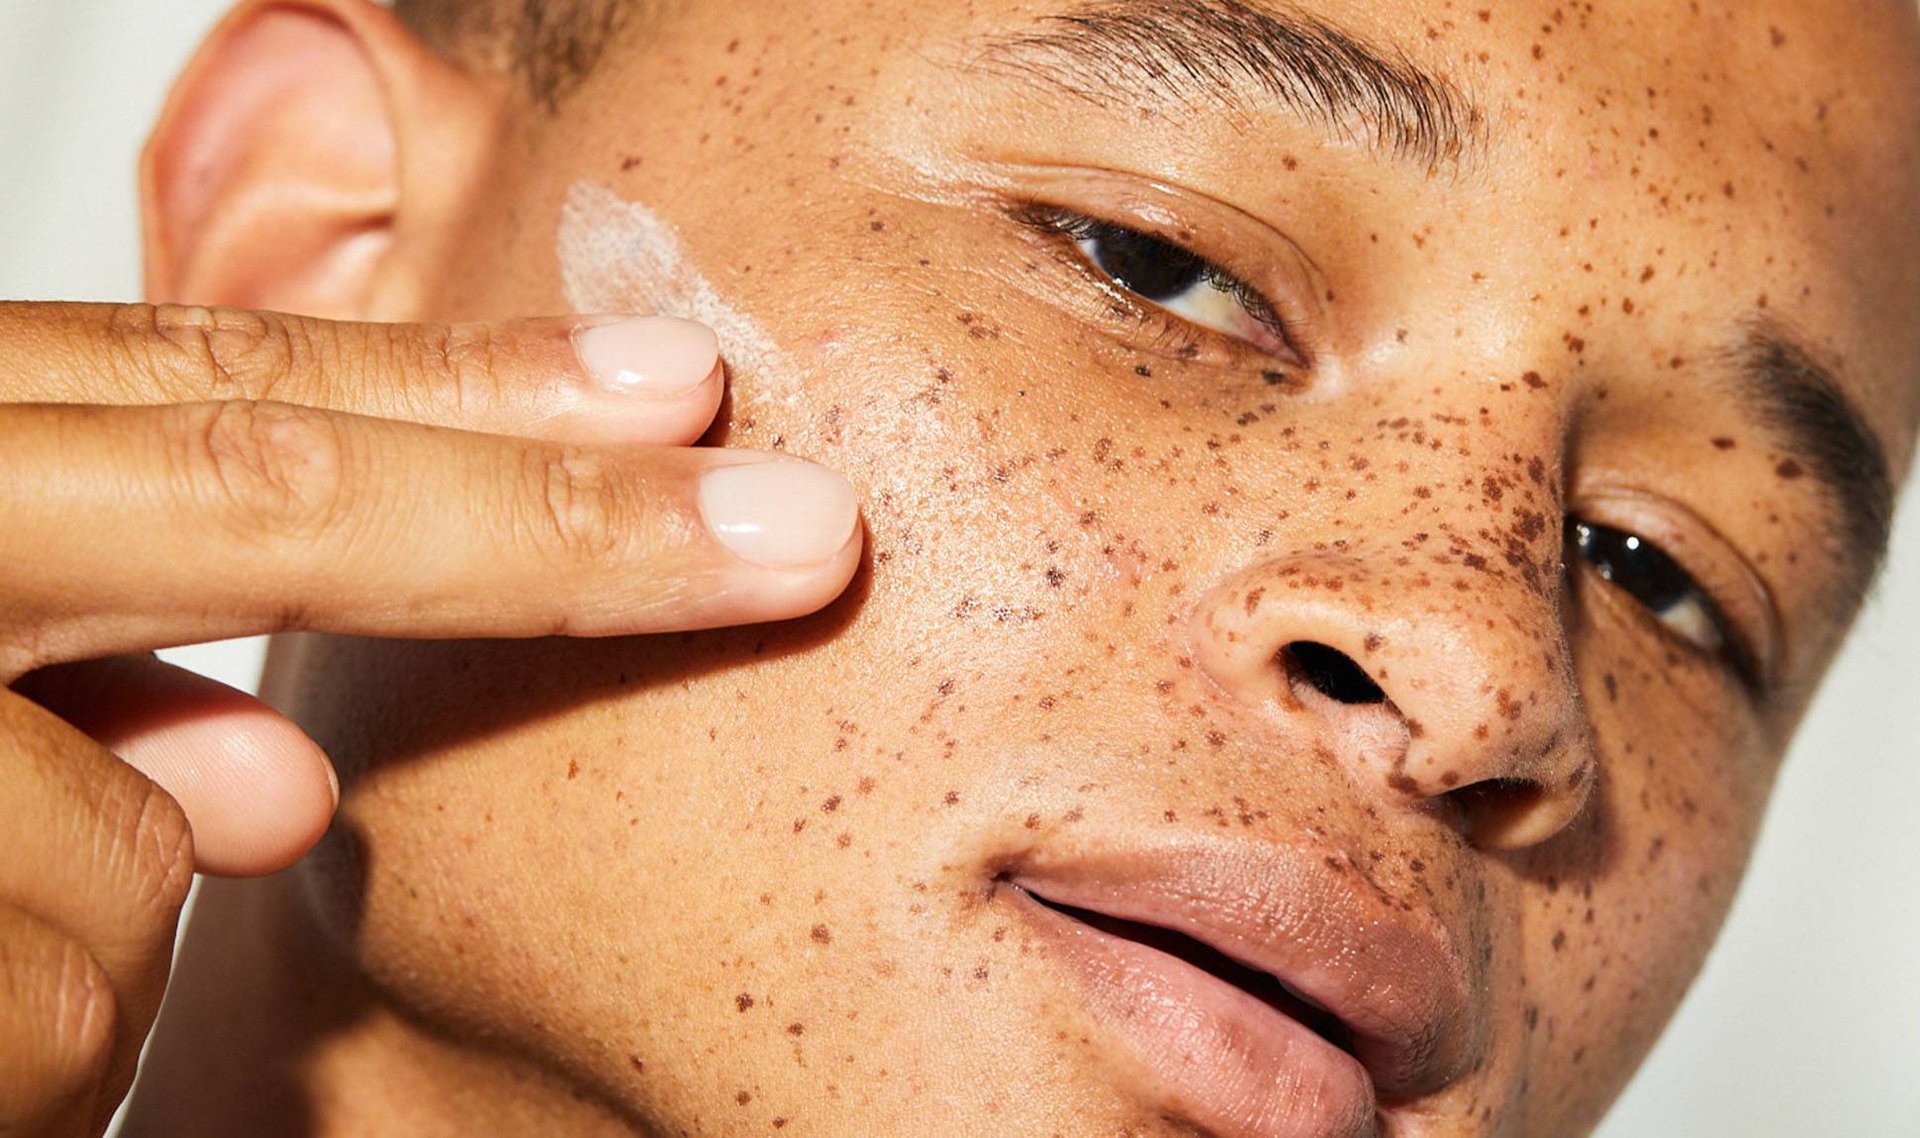 Closeup photo of a young man applying skincare product to his cheek with his fingers.